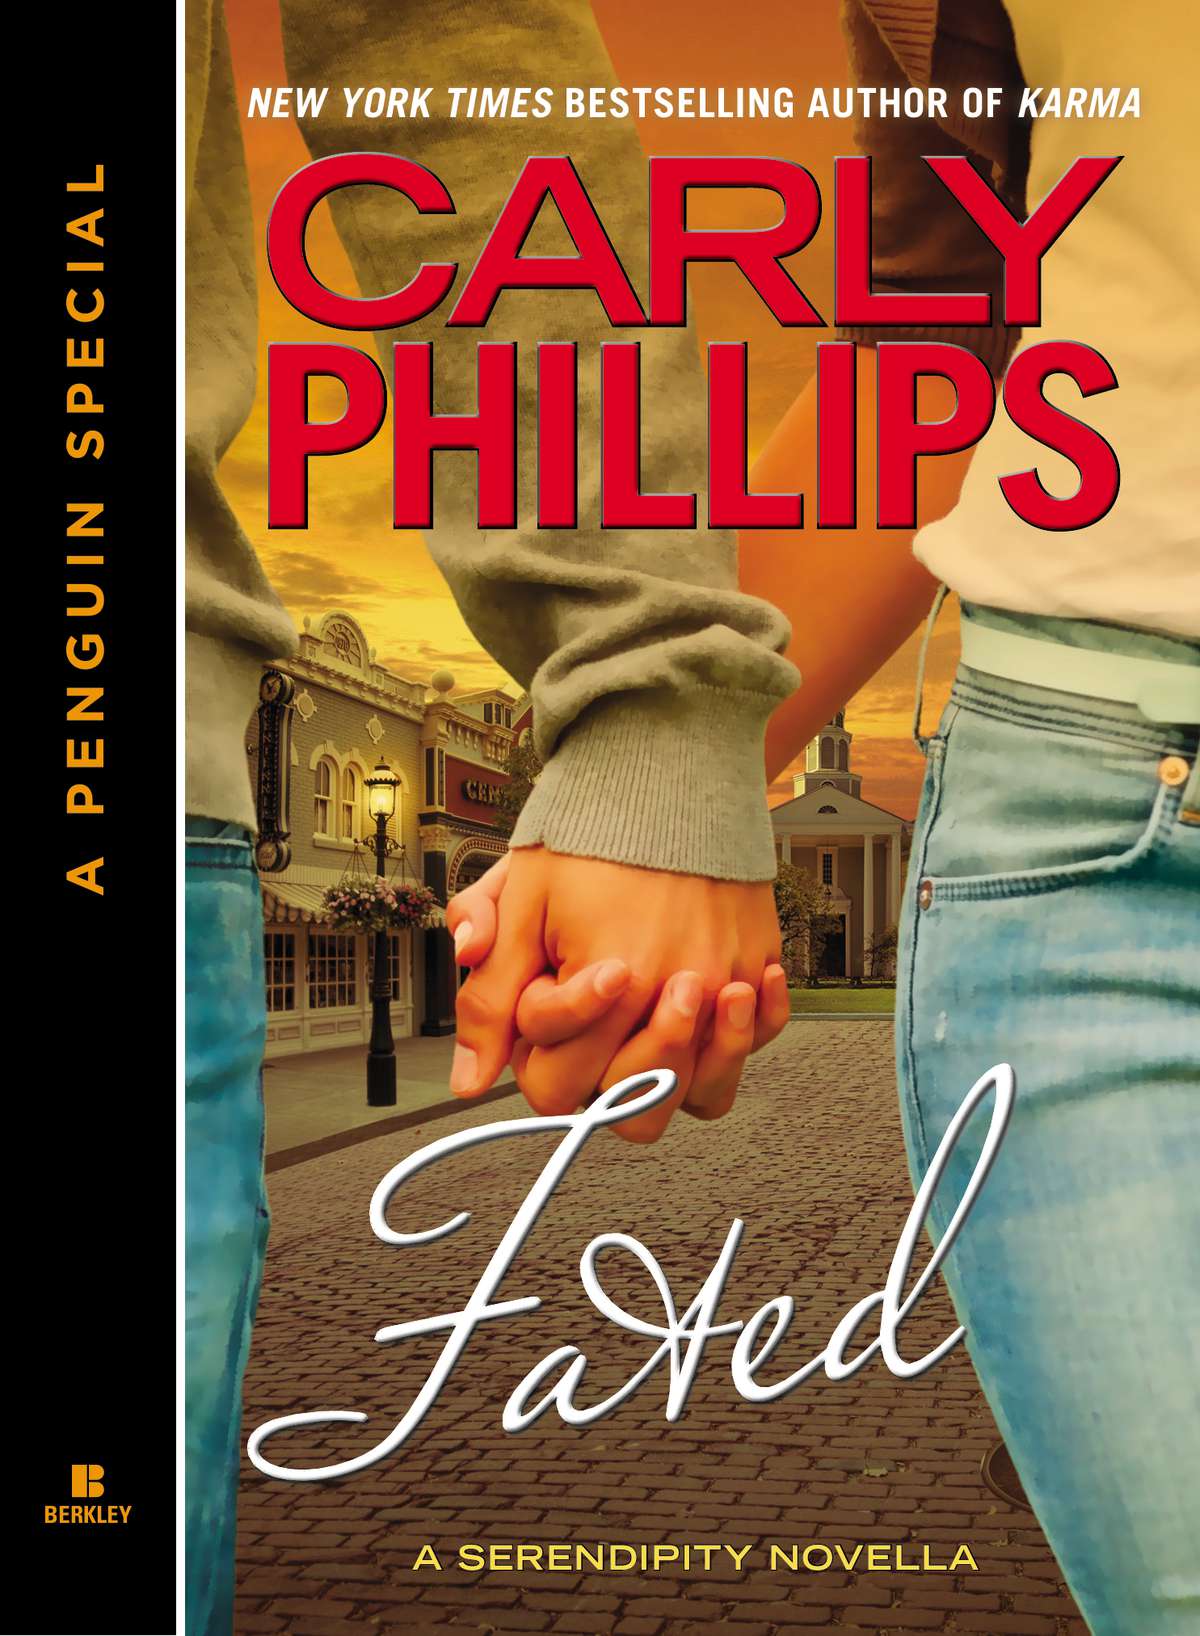 Fated (2012) by Carly Phillips